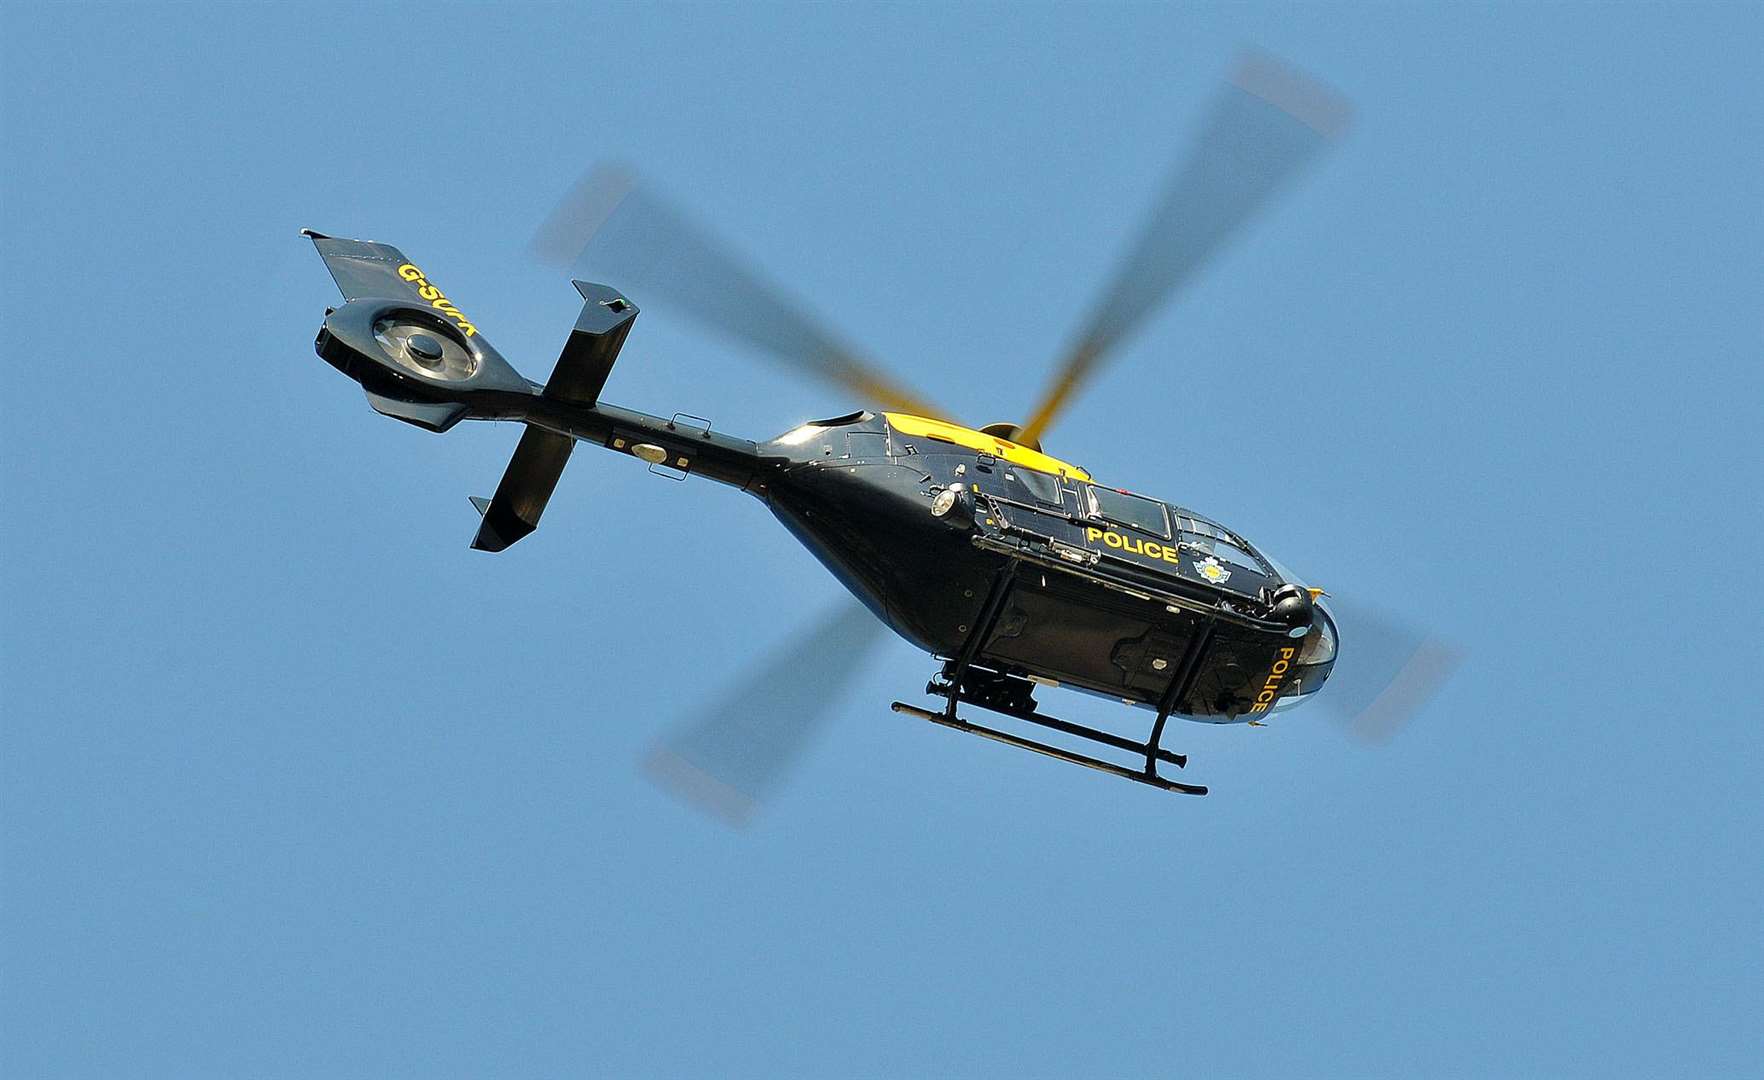 Police Helicopter. (3194542)